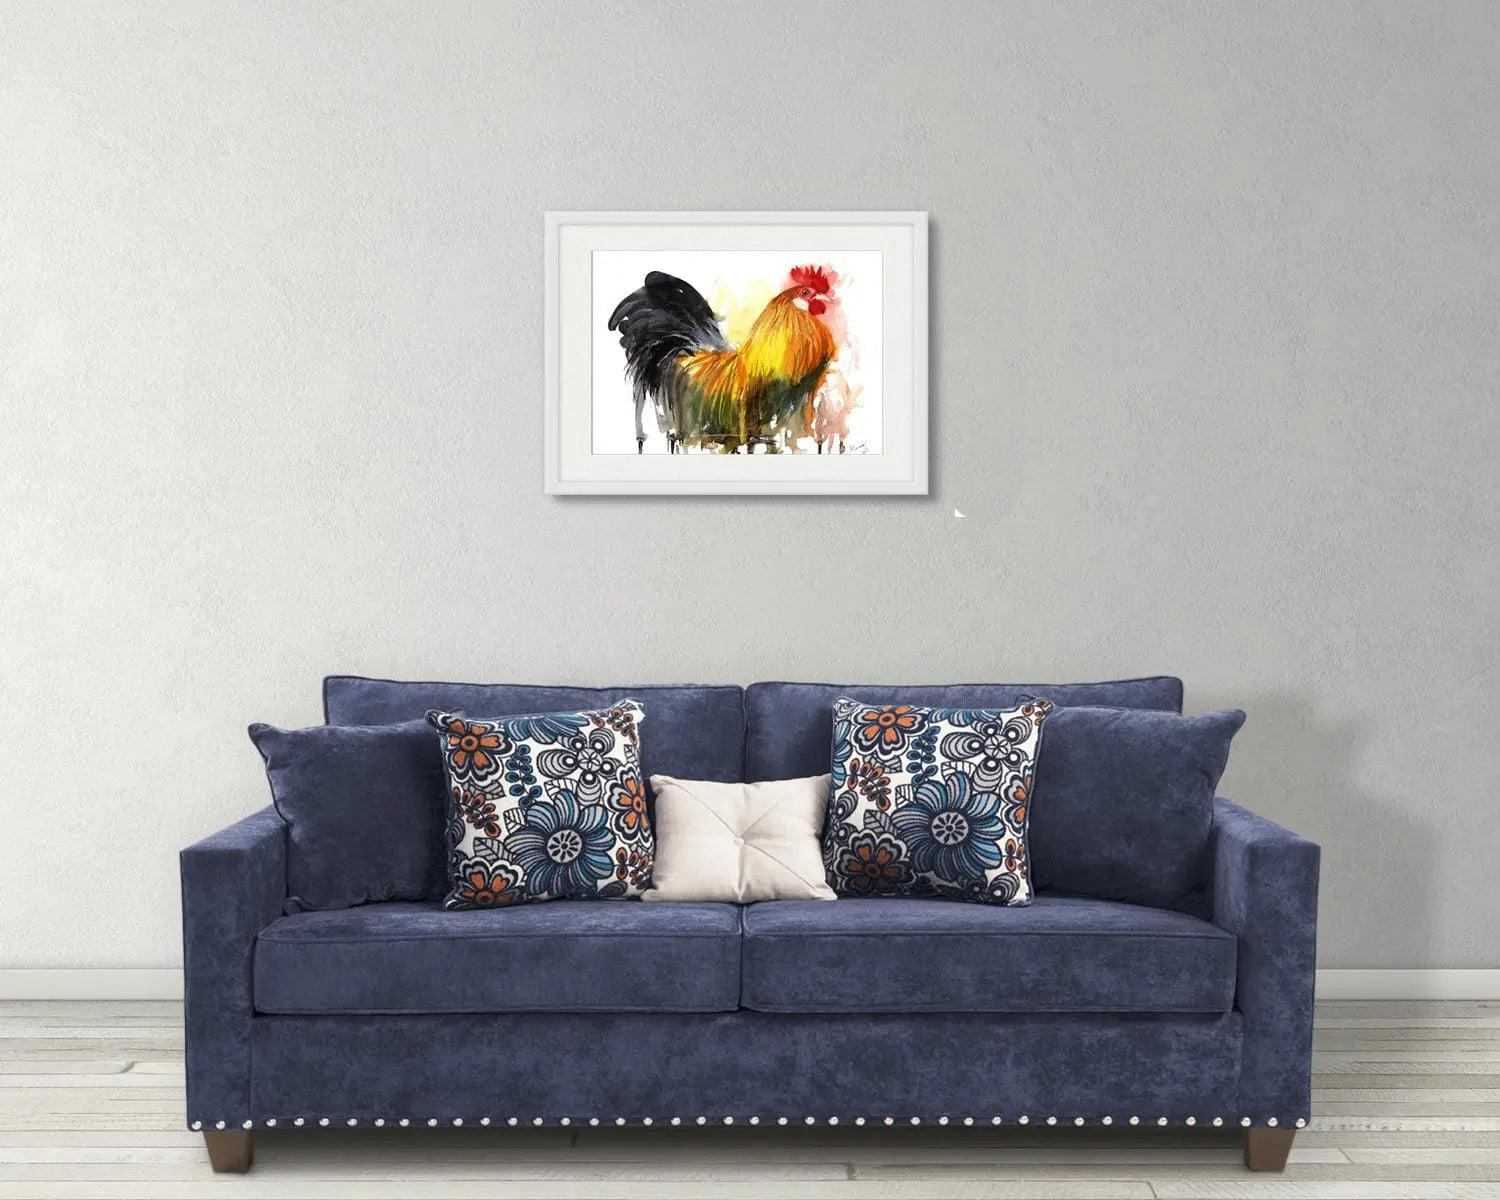 Dutch Peking Bantam Painting Chicken Numbered limited edition Giclee Print of a Watercolour Painting ArtbyMyleslaurence